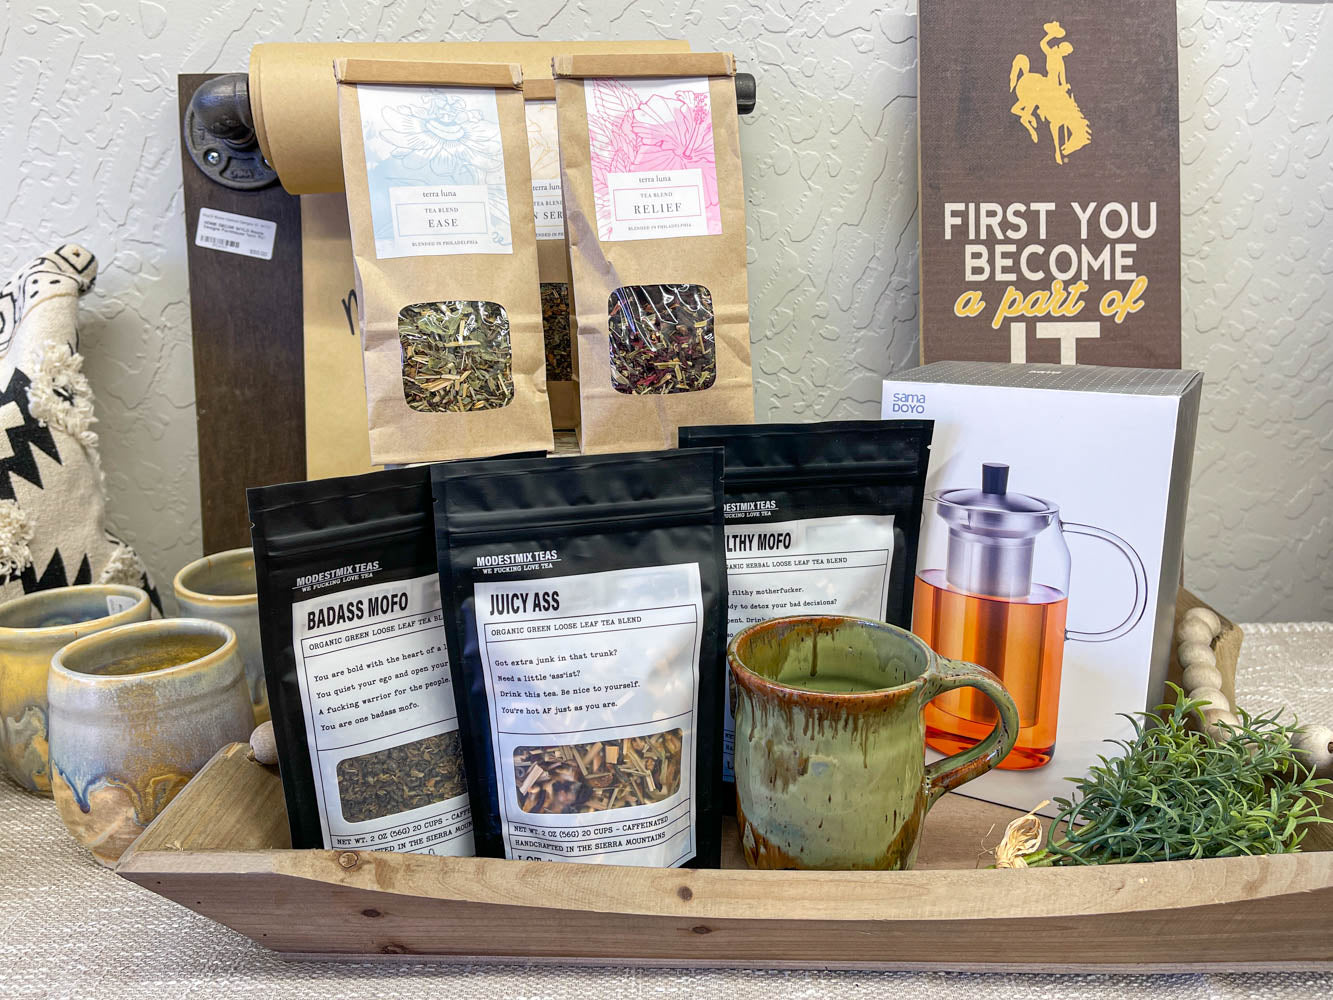 Mack & Co carries everything you need for your tea taste.